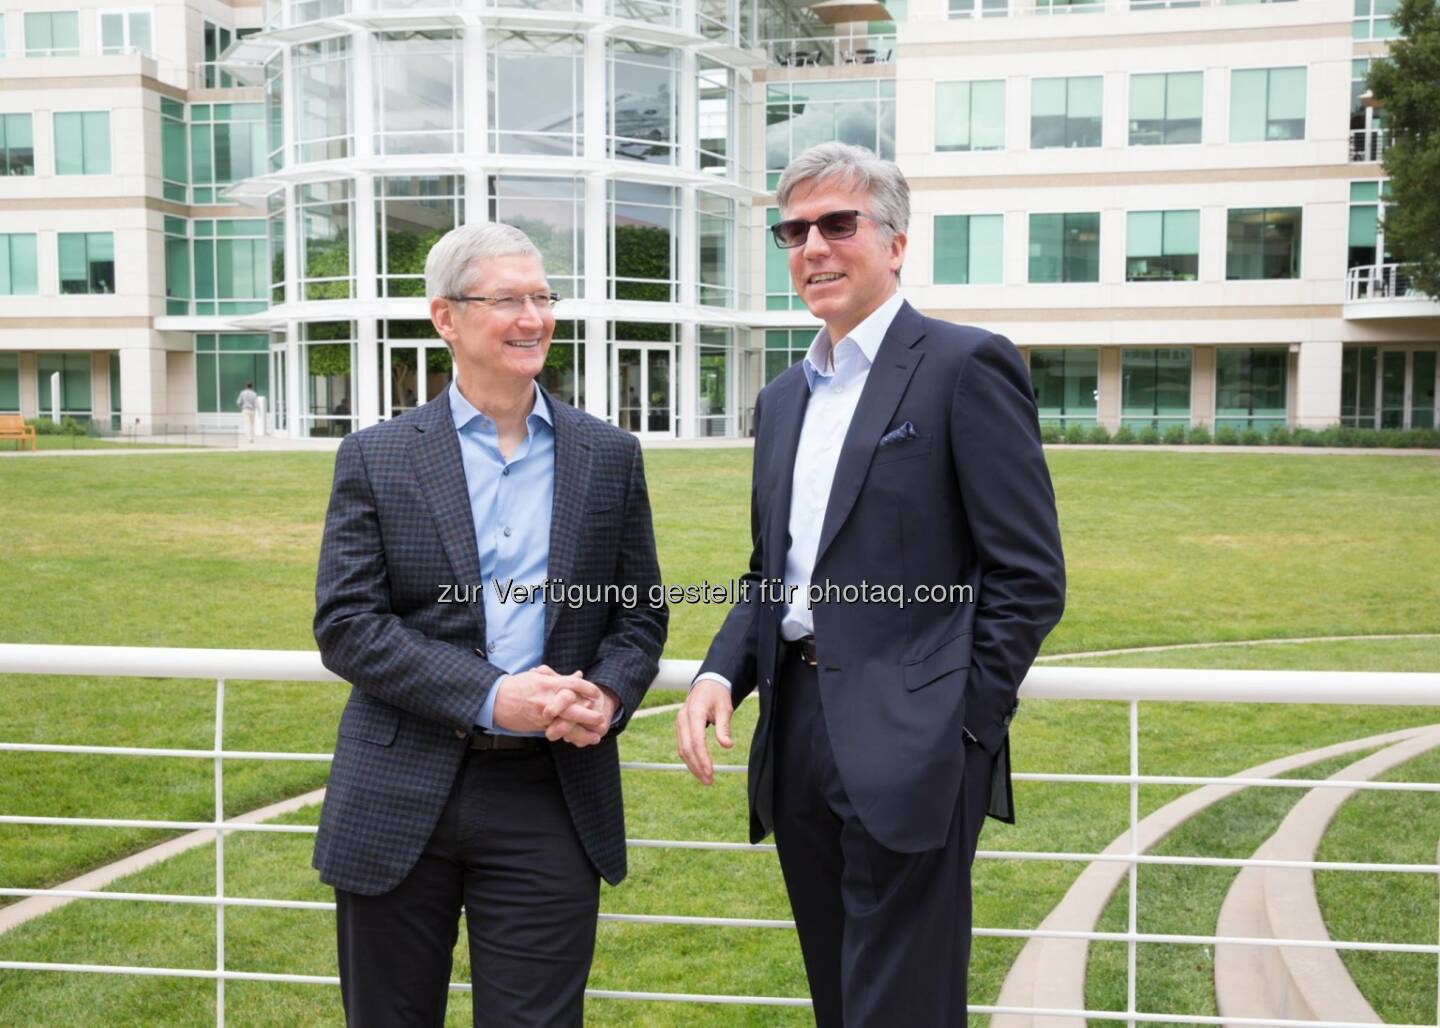 Apple and SAP will be teaming up and combining rich enterprise data they rely on from SAP with the ease of their Apple device. Learn more -  http://spr.ly/6185BW5jv  Source: http://facebook.com/SAP